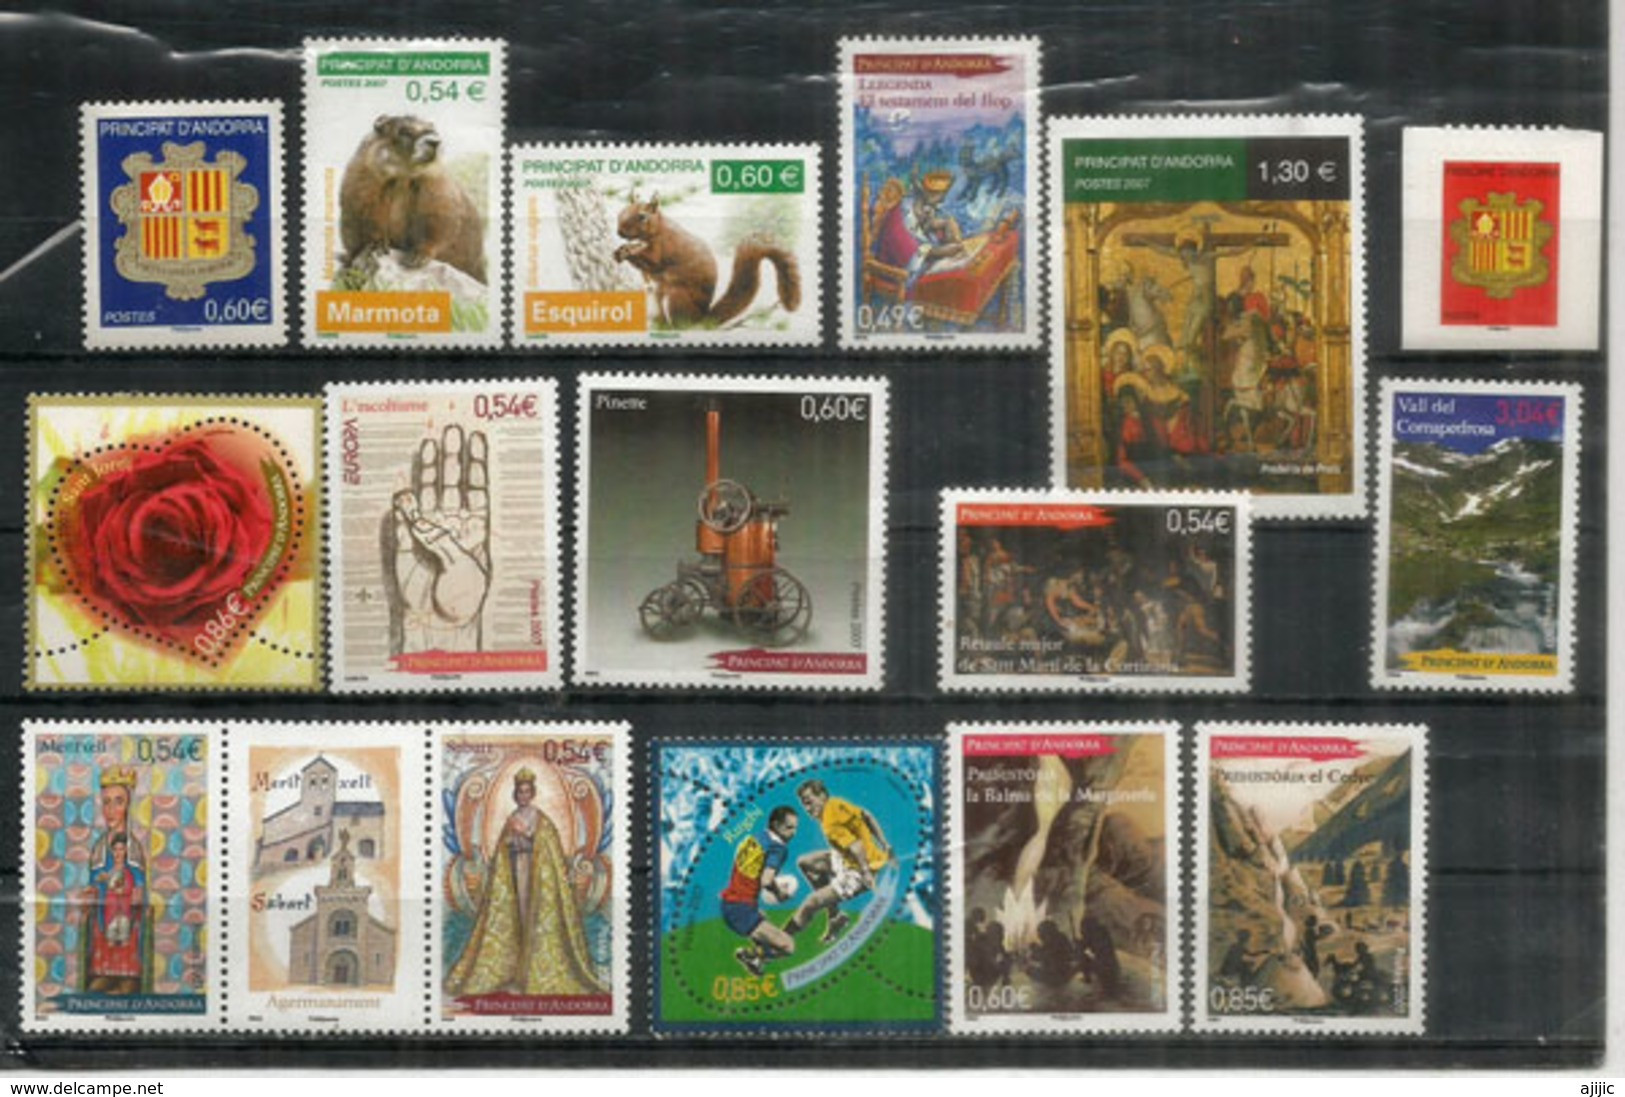 Année Complète 2007, 17 Timbres  Neufs ** Rugby World Cup, Prehistoire Andorrane,etc - Full Years